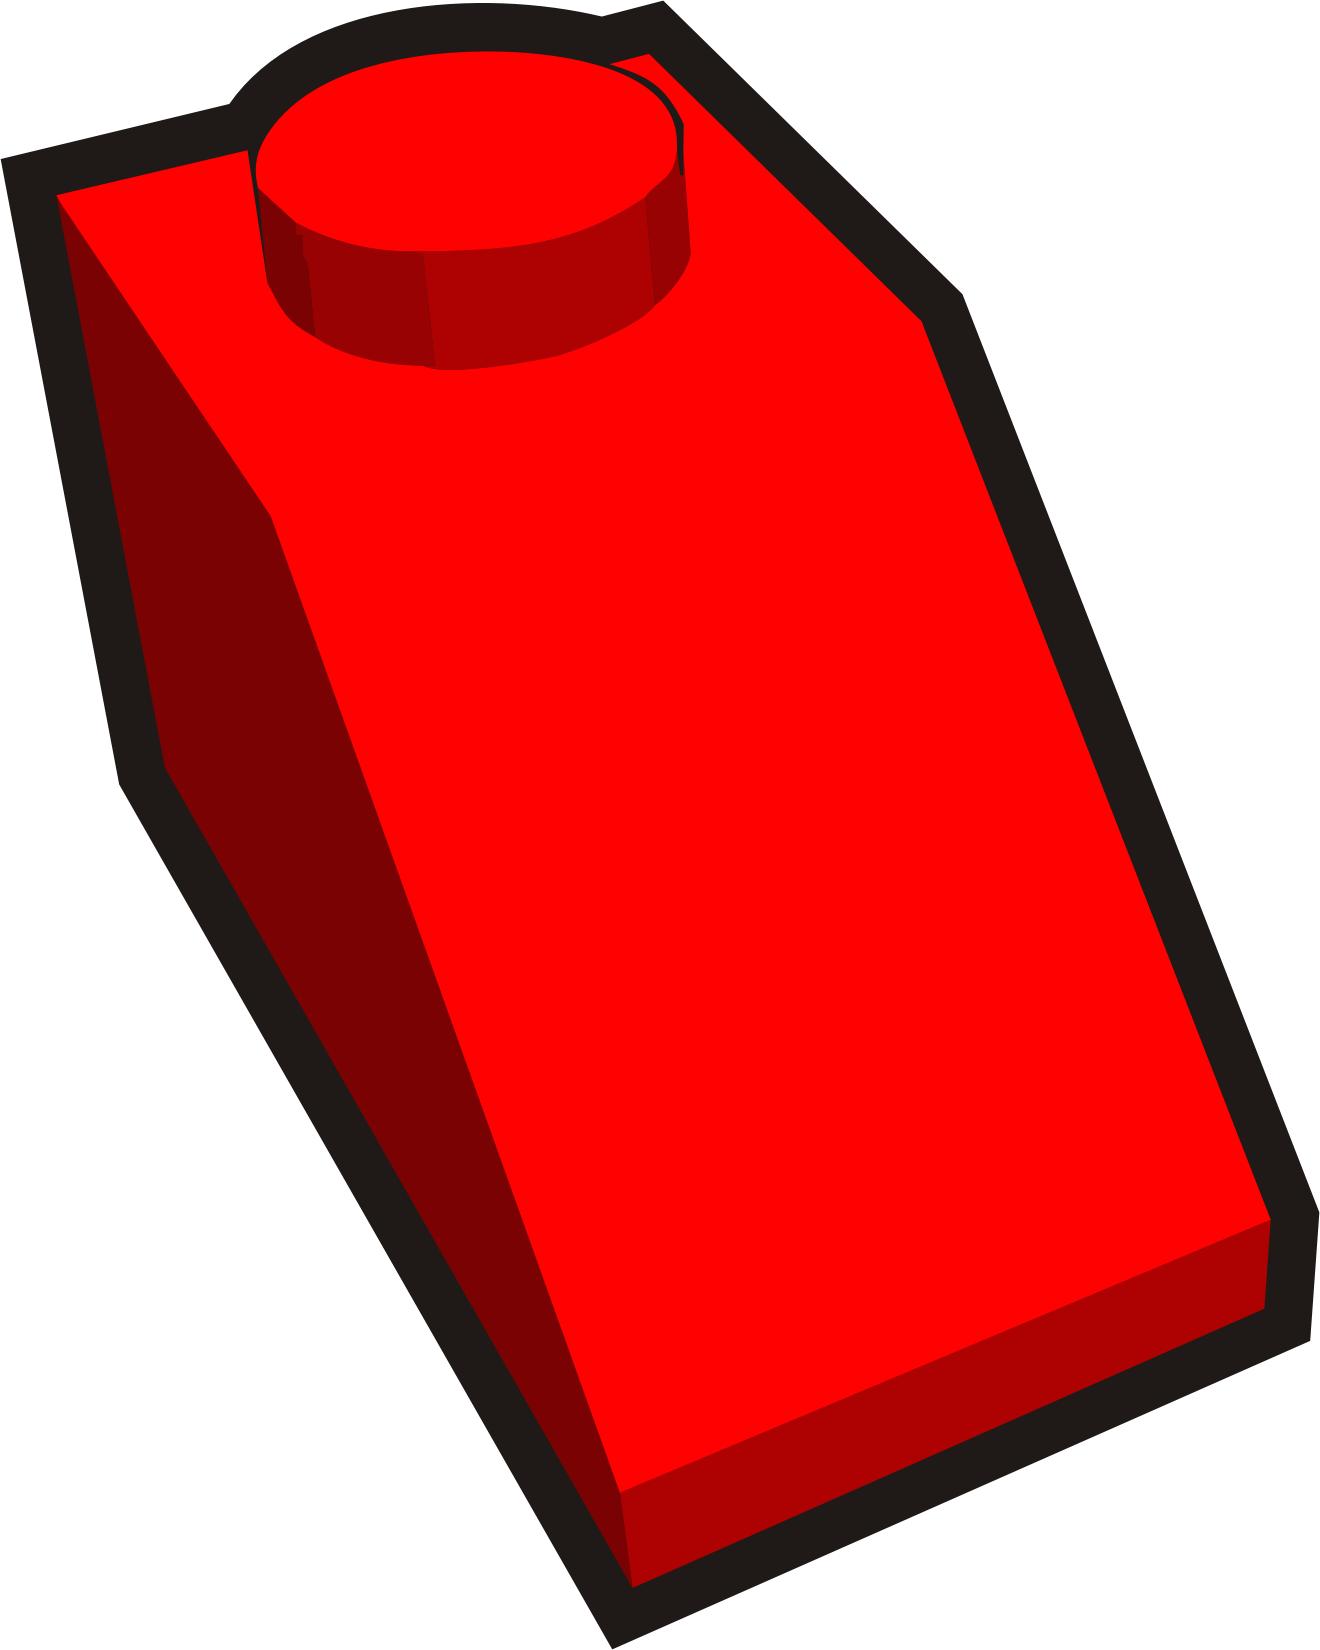 Clip is a Brick - 2x1 slope png